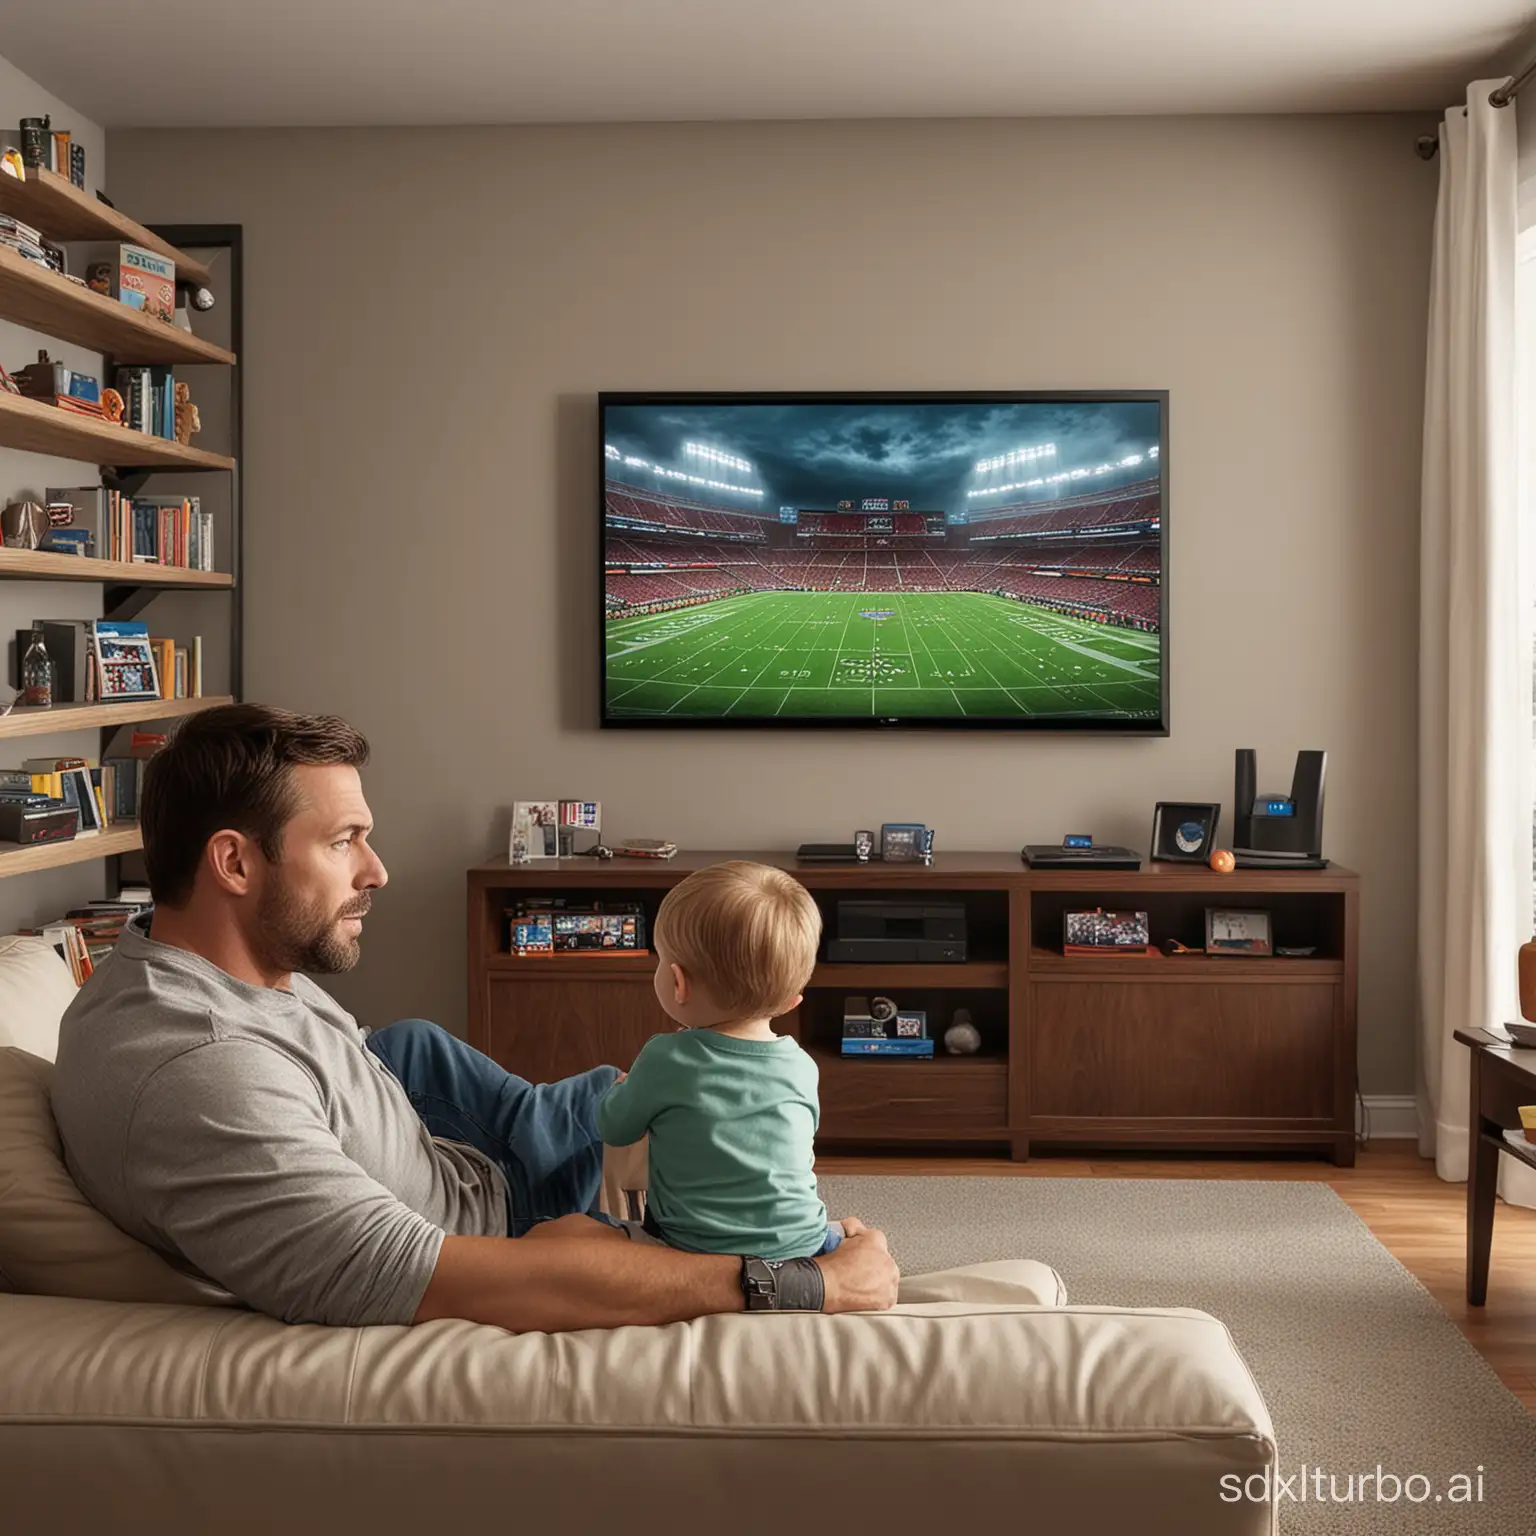 "Photorealistic image of a man and his son watching NFL at home."